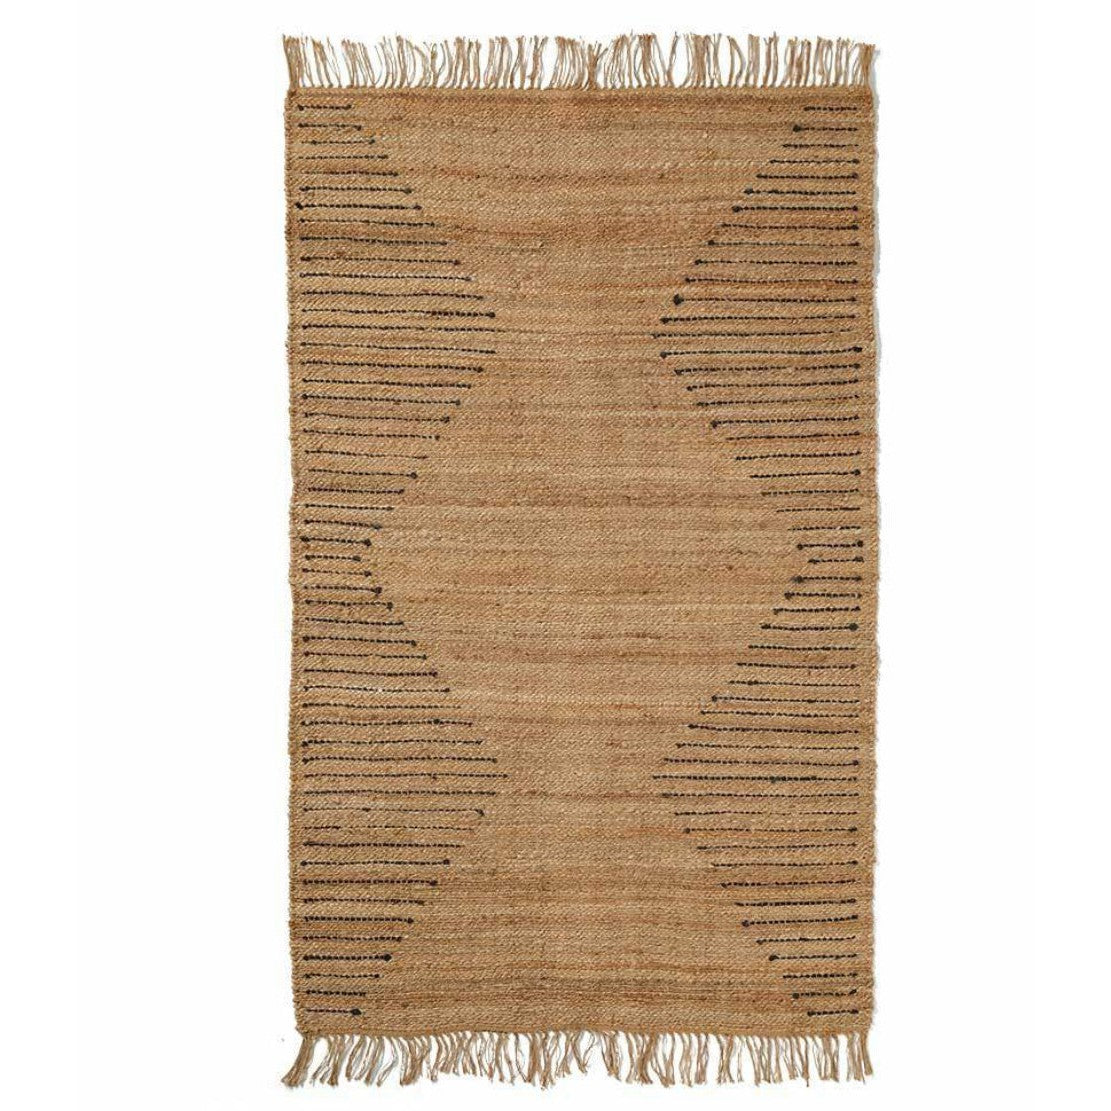 Ridgeline Reflection Jute Rug - 6’ x 9’ (*Local Pickup/Local Delivery Only)